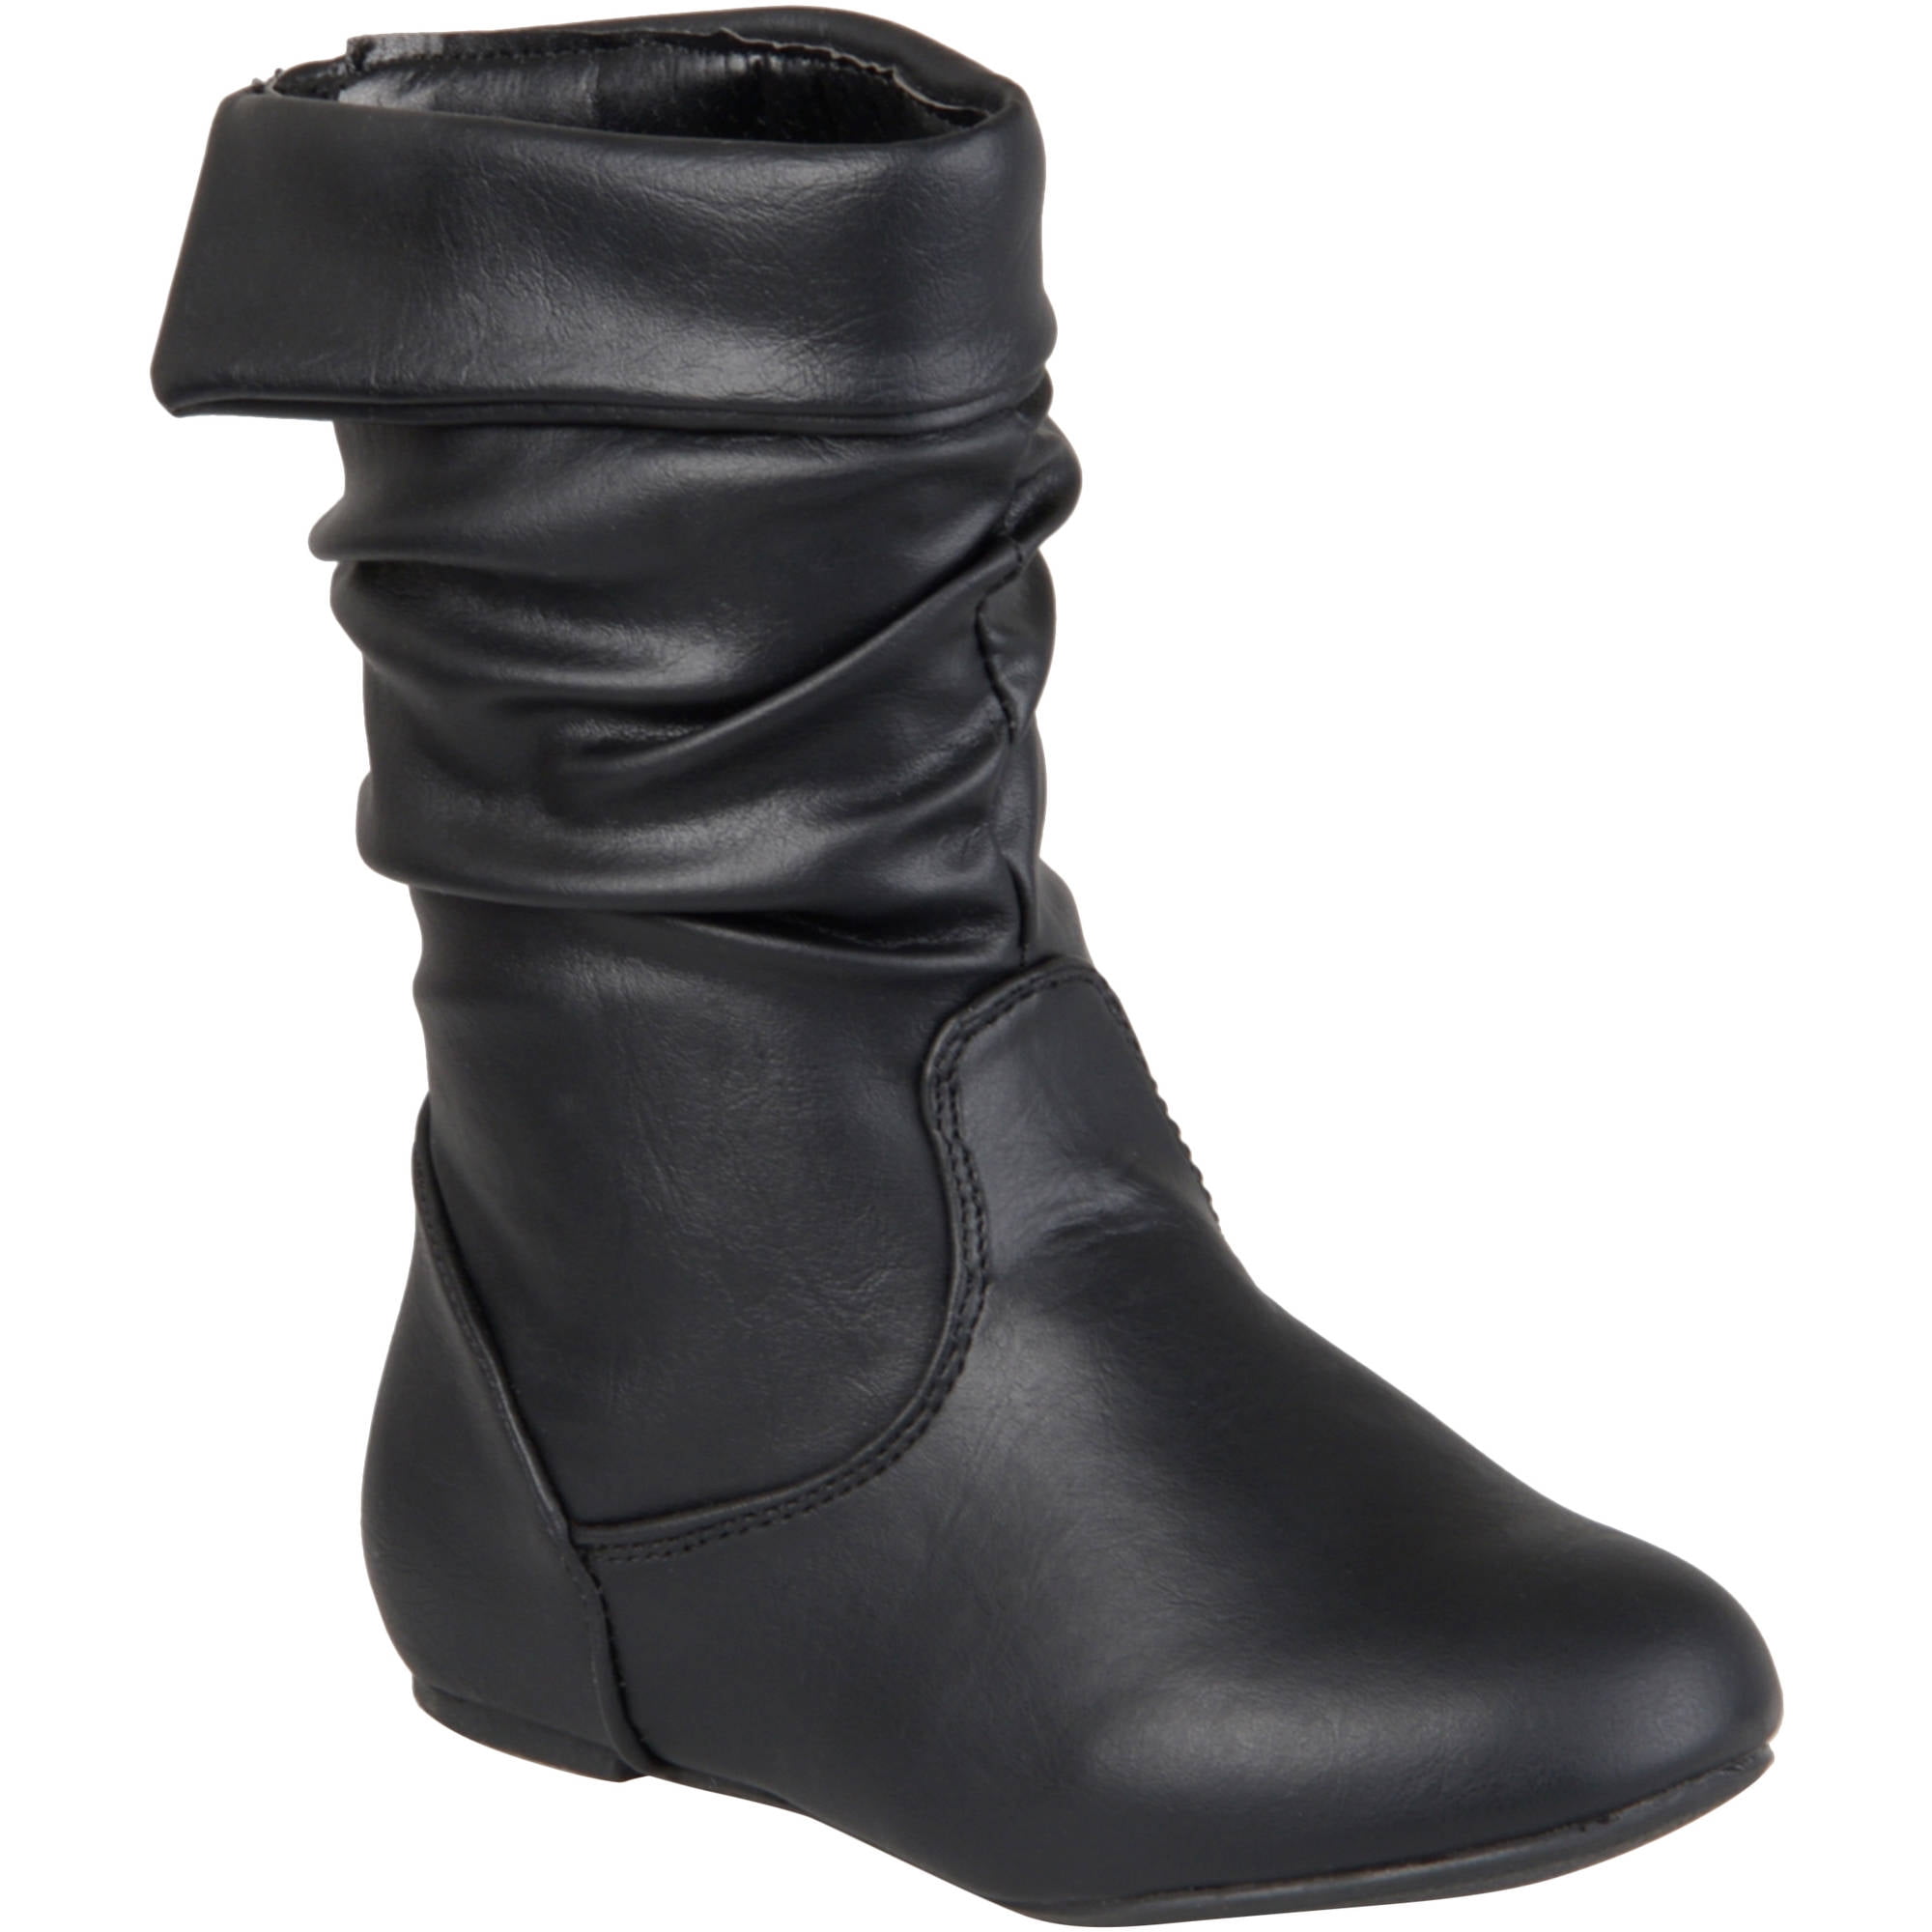 Brinley Co Kids Girl's Slouchy Accent Boots - Walmart.com